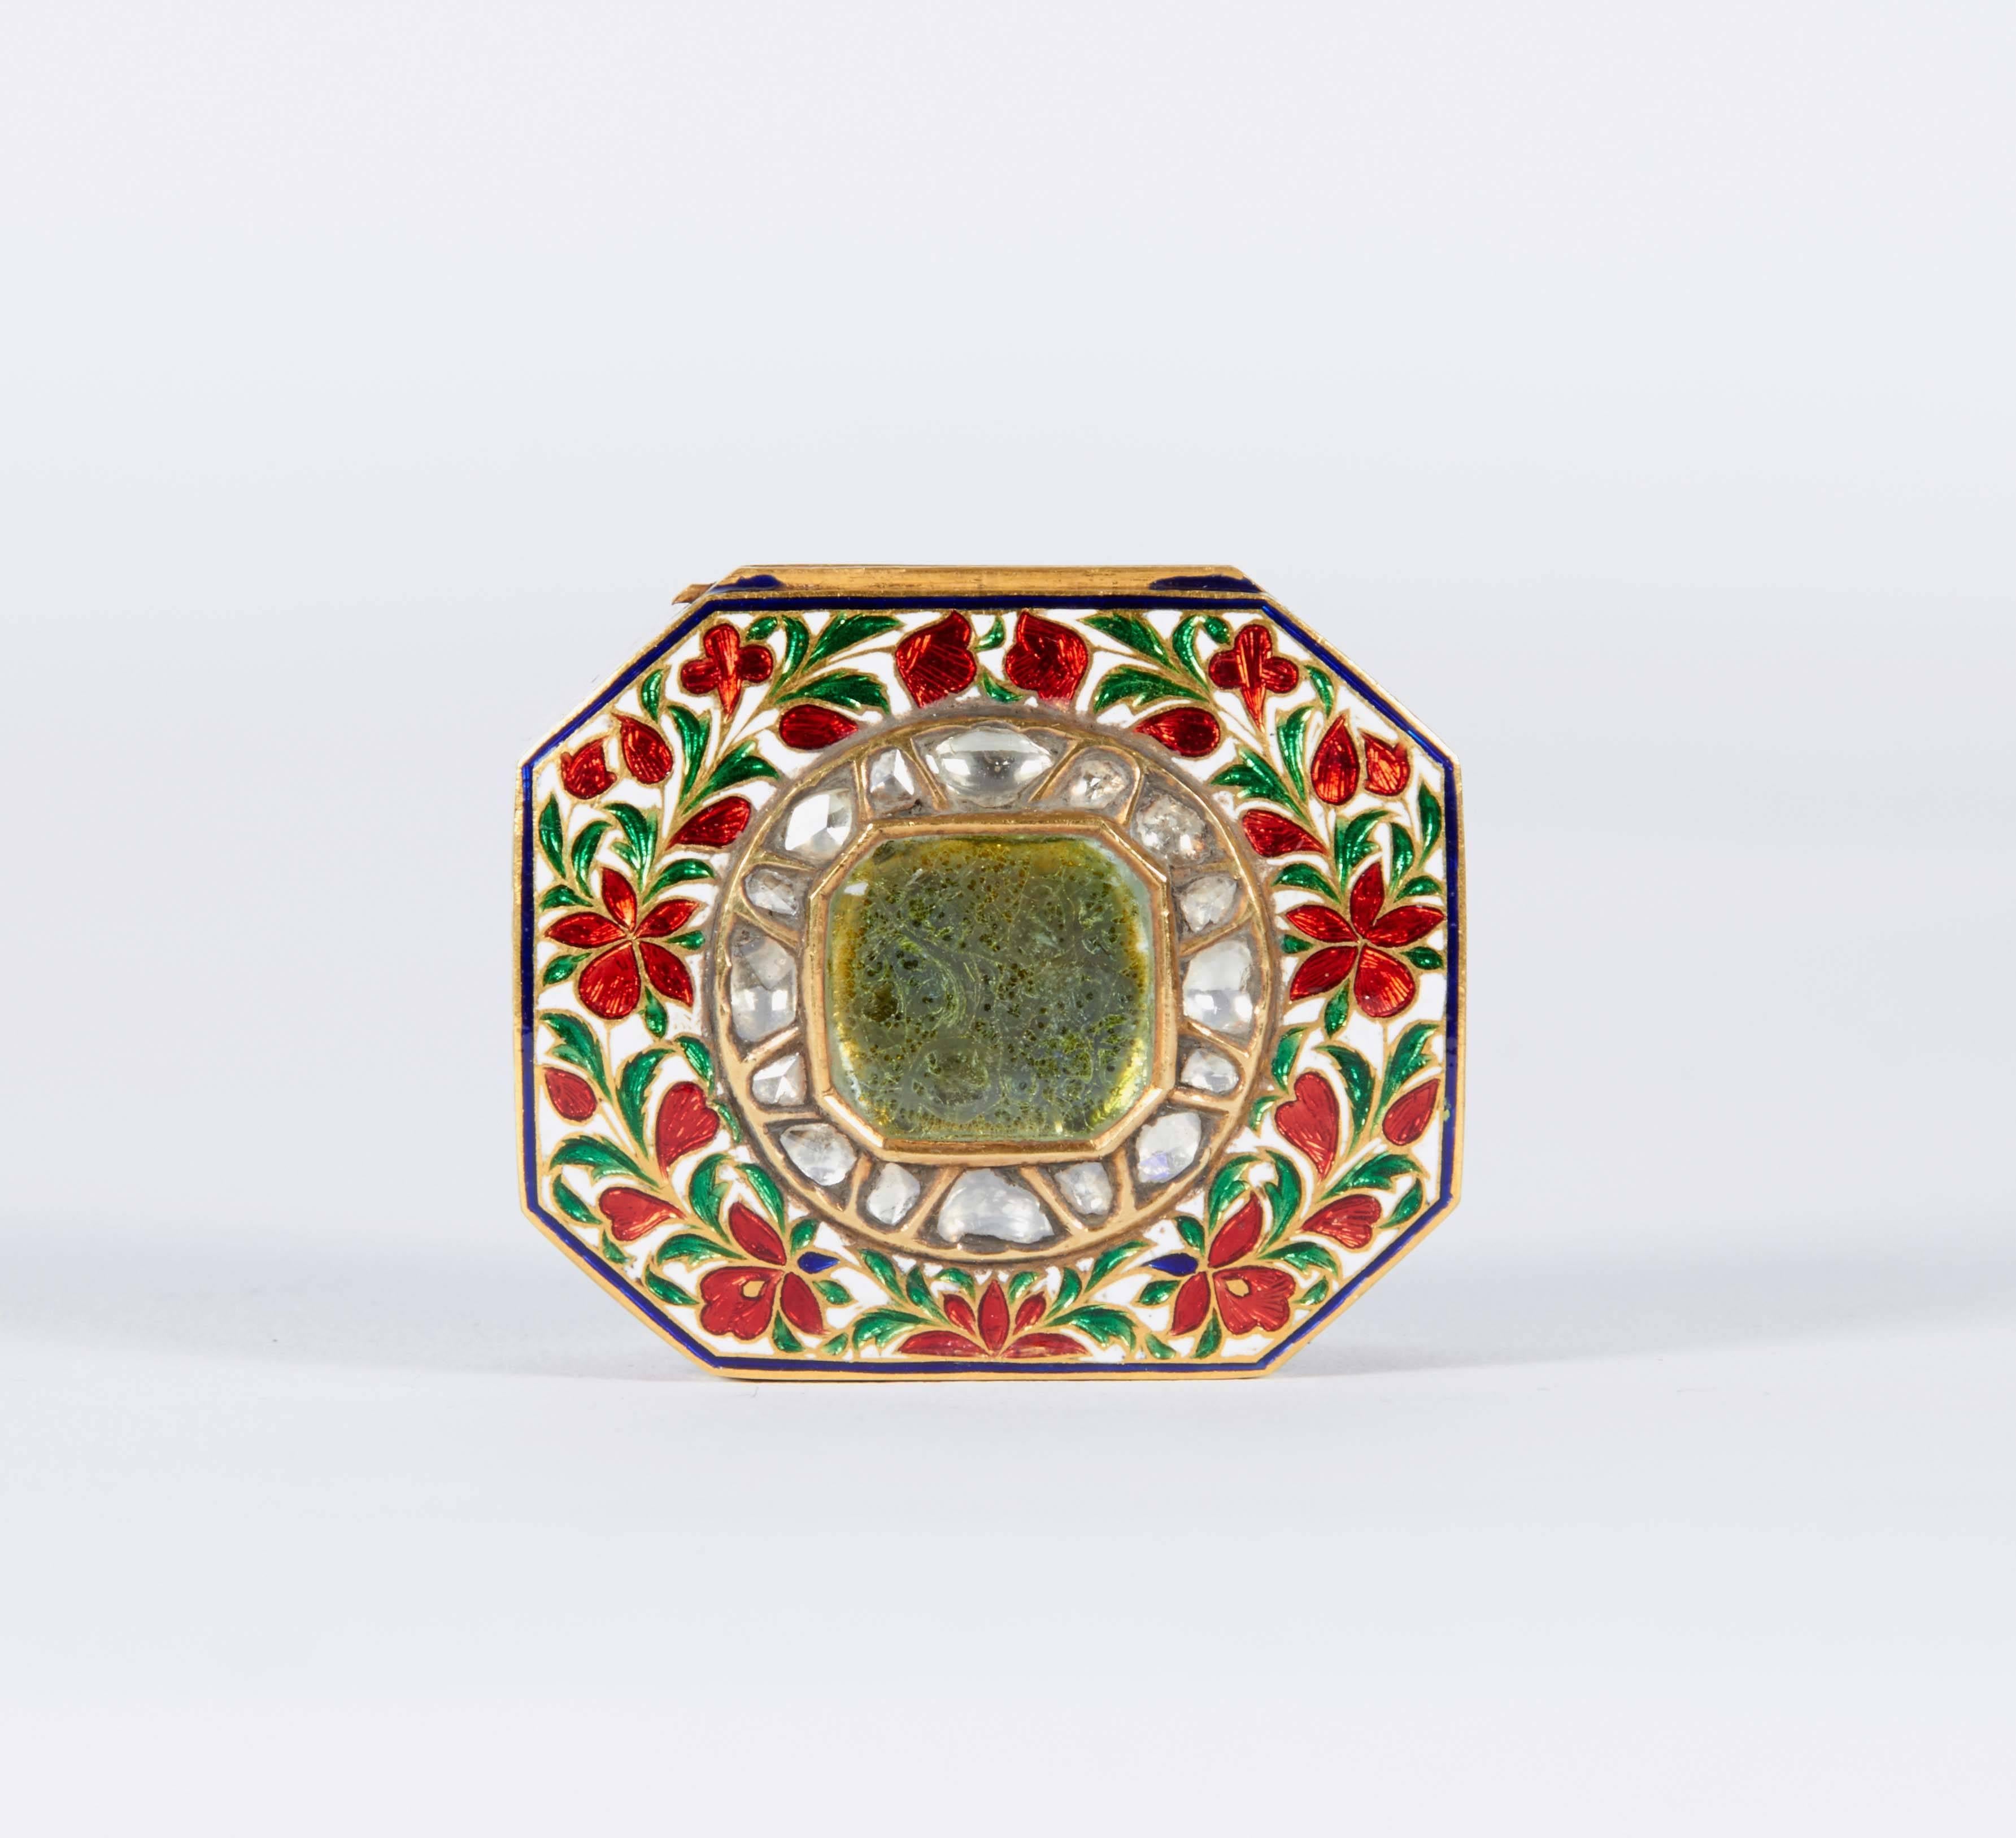 A very fine 22-karat gold, enamel and diamond snuff box in the Mughal style. 

Finely painted with birds and flowers and set with rose-cut diamonds. 

Very high quality object. 

Weighs 52.6 grams.


Depth *3.5 cm
Width *4.3 cm
Height *2.8 cm
